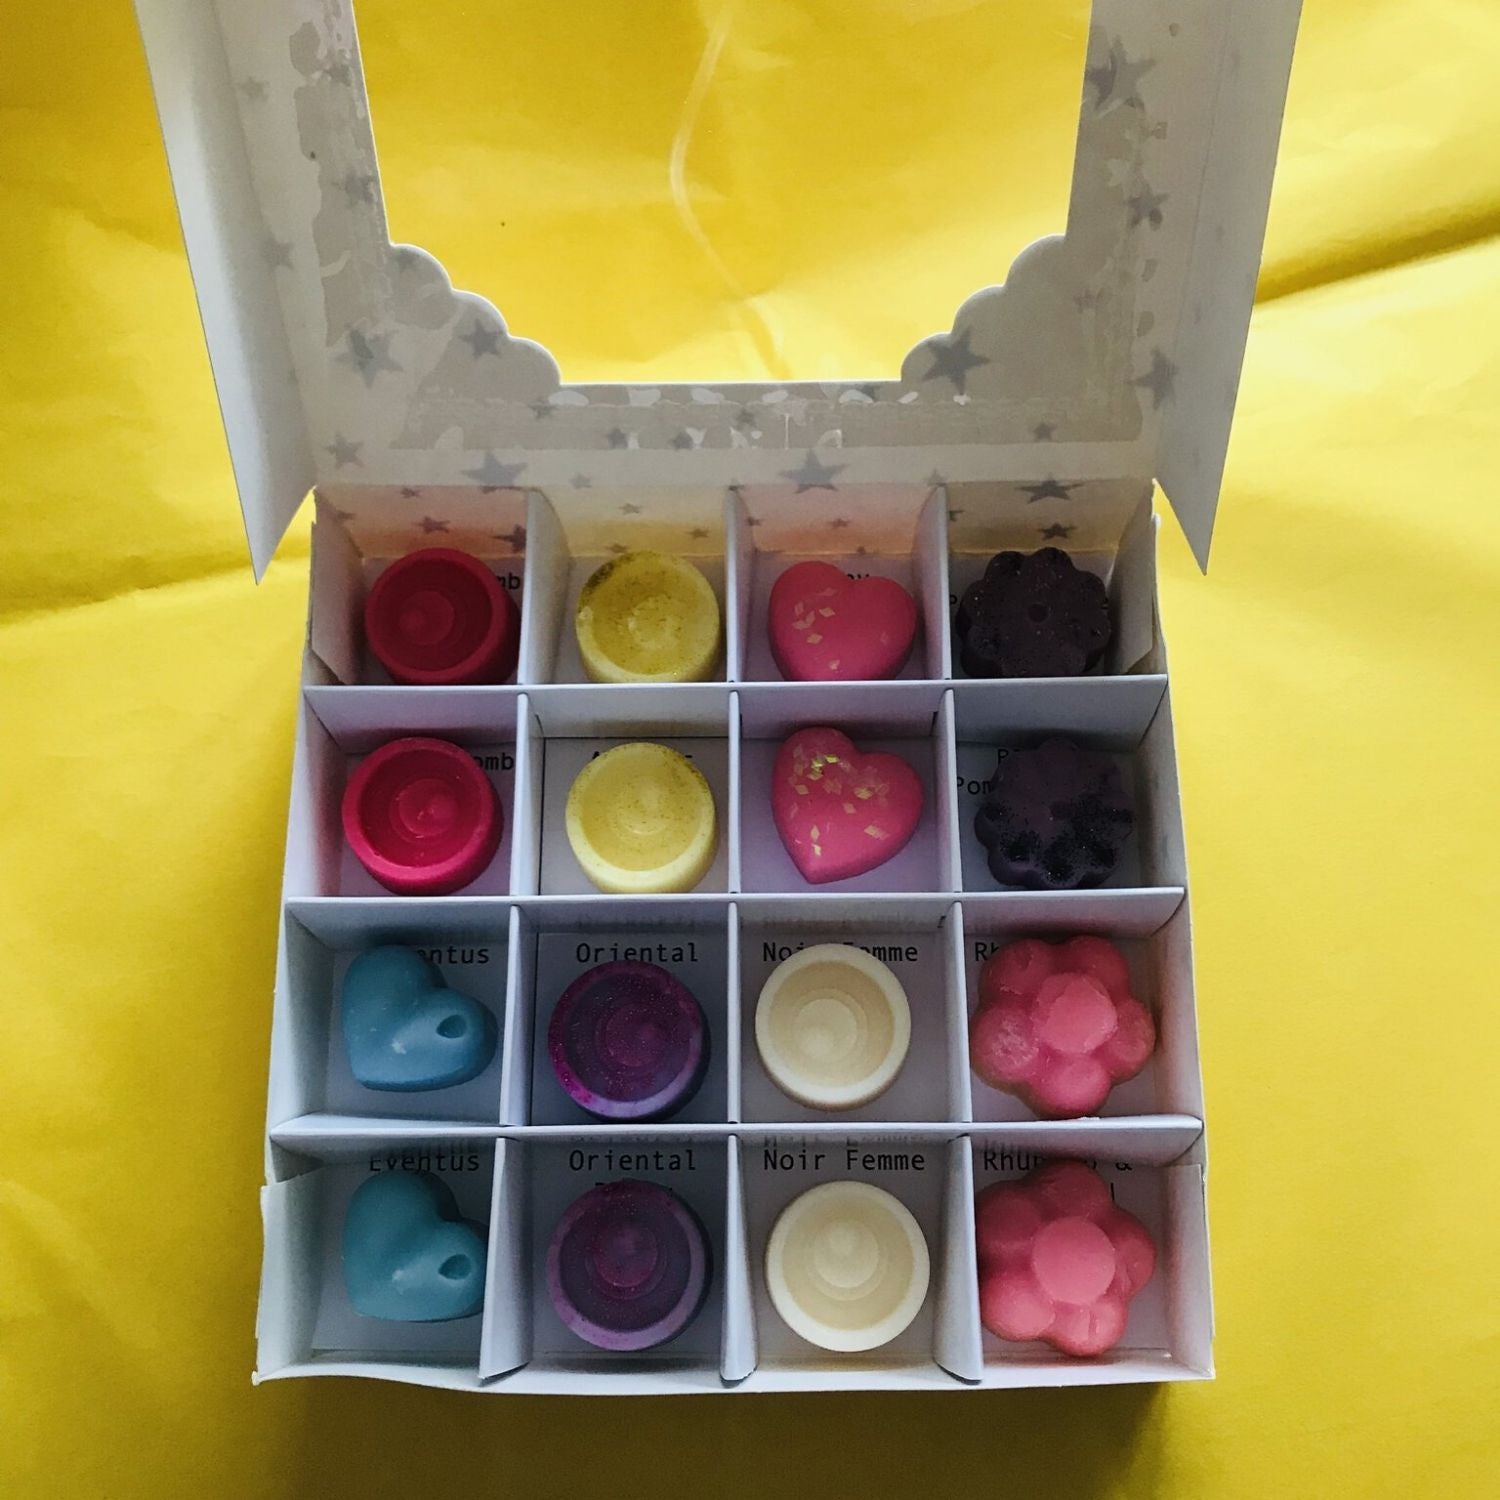 Selection Box Of Melts - Scented Soy Wax Melts | Wax Melt Warmers - MadisonMelts